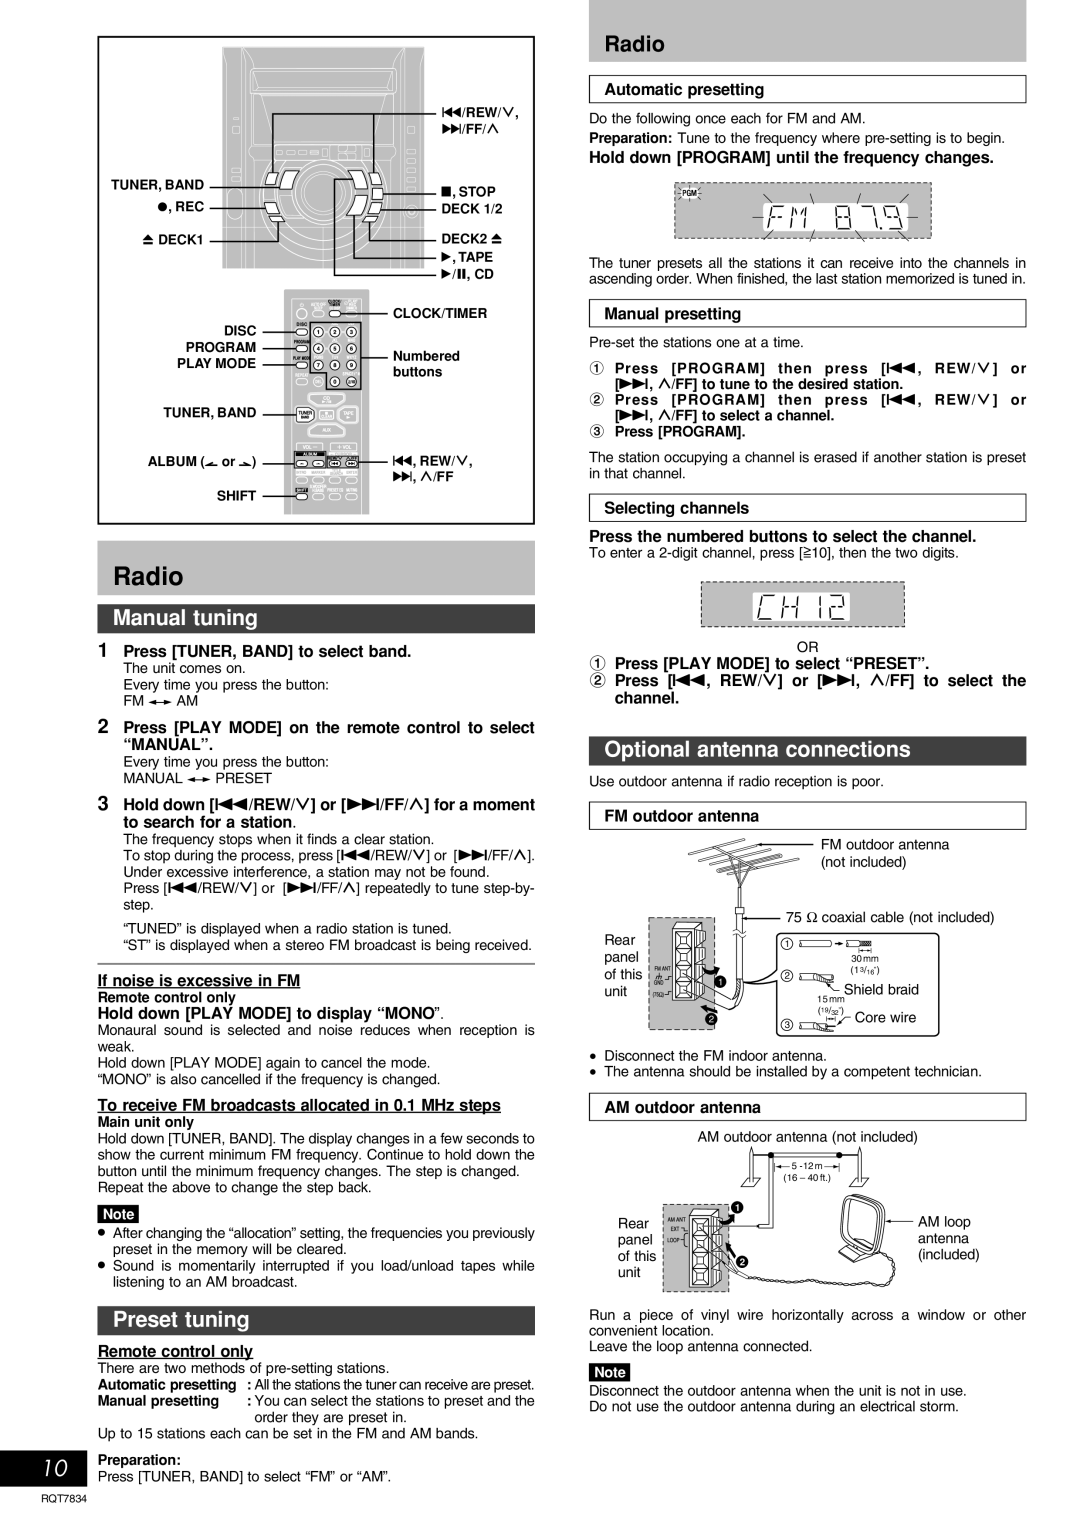 Panasonic RQT7834-3P important safety instructions Radio, Manual tuning, Preset tuning, Optional antenna connections 